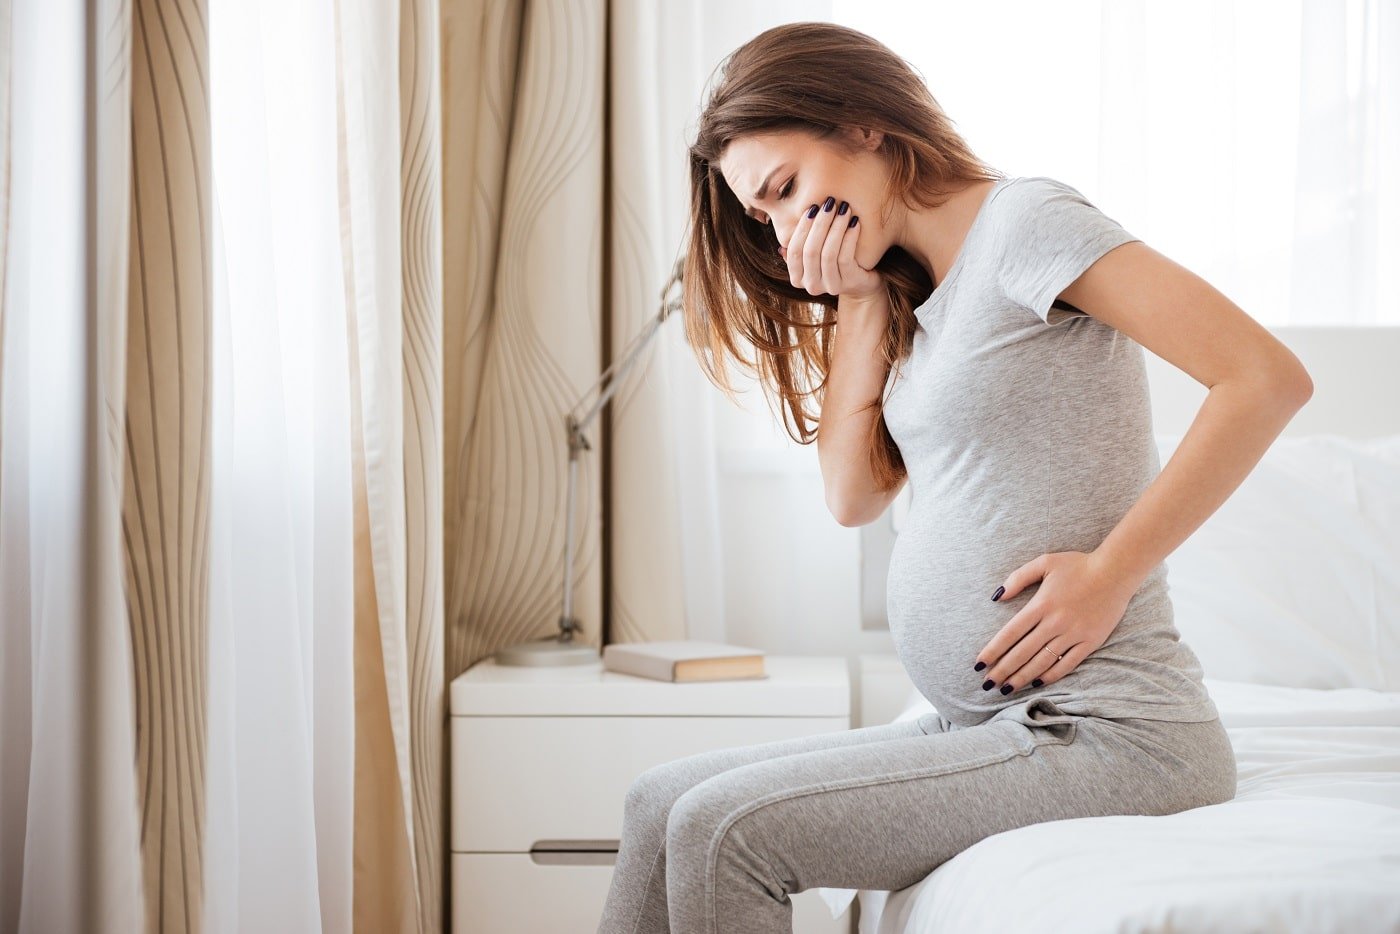 What is Hyperemesis Gravidarum and what causes it?